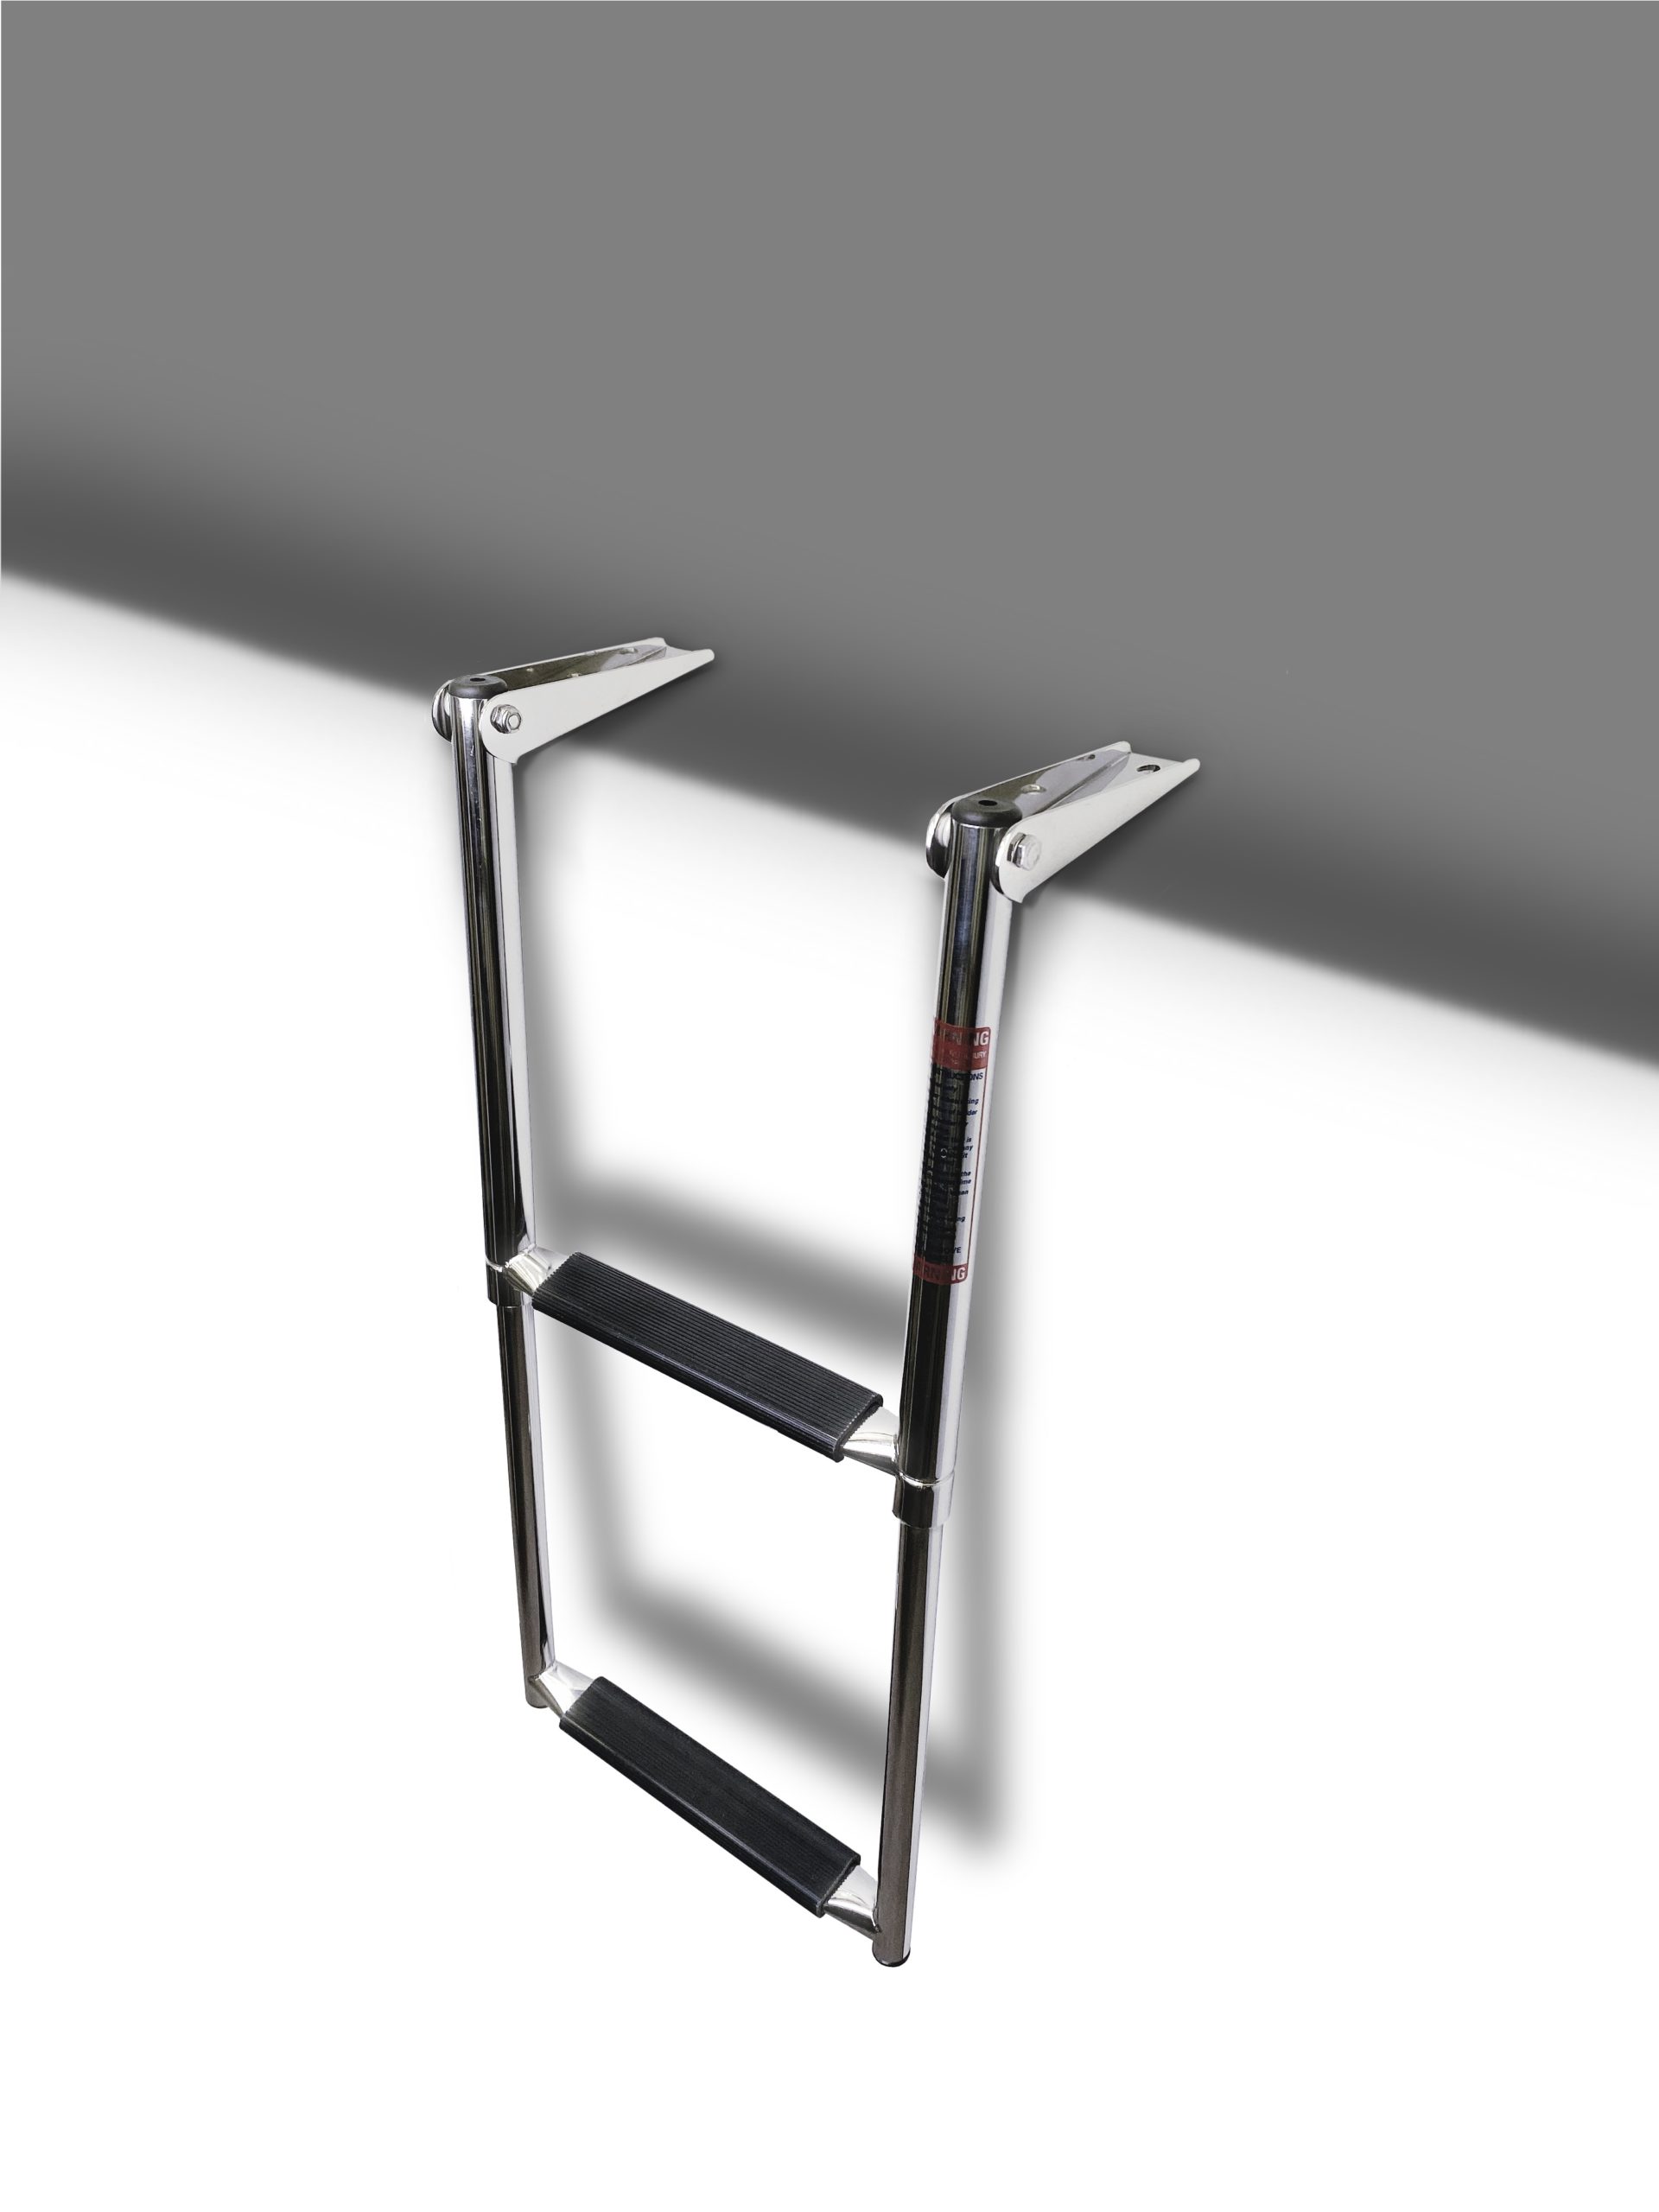 2-step over platform ladder, fully deployed and ready for use, demonstrating its sturdy stainless steel frame and practical design.